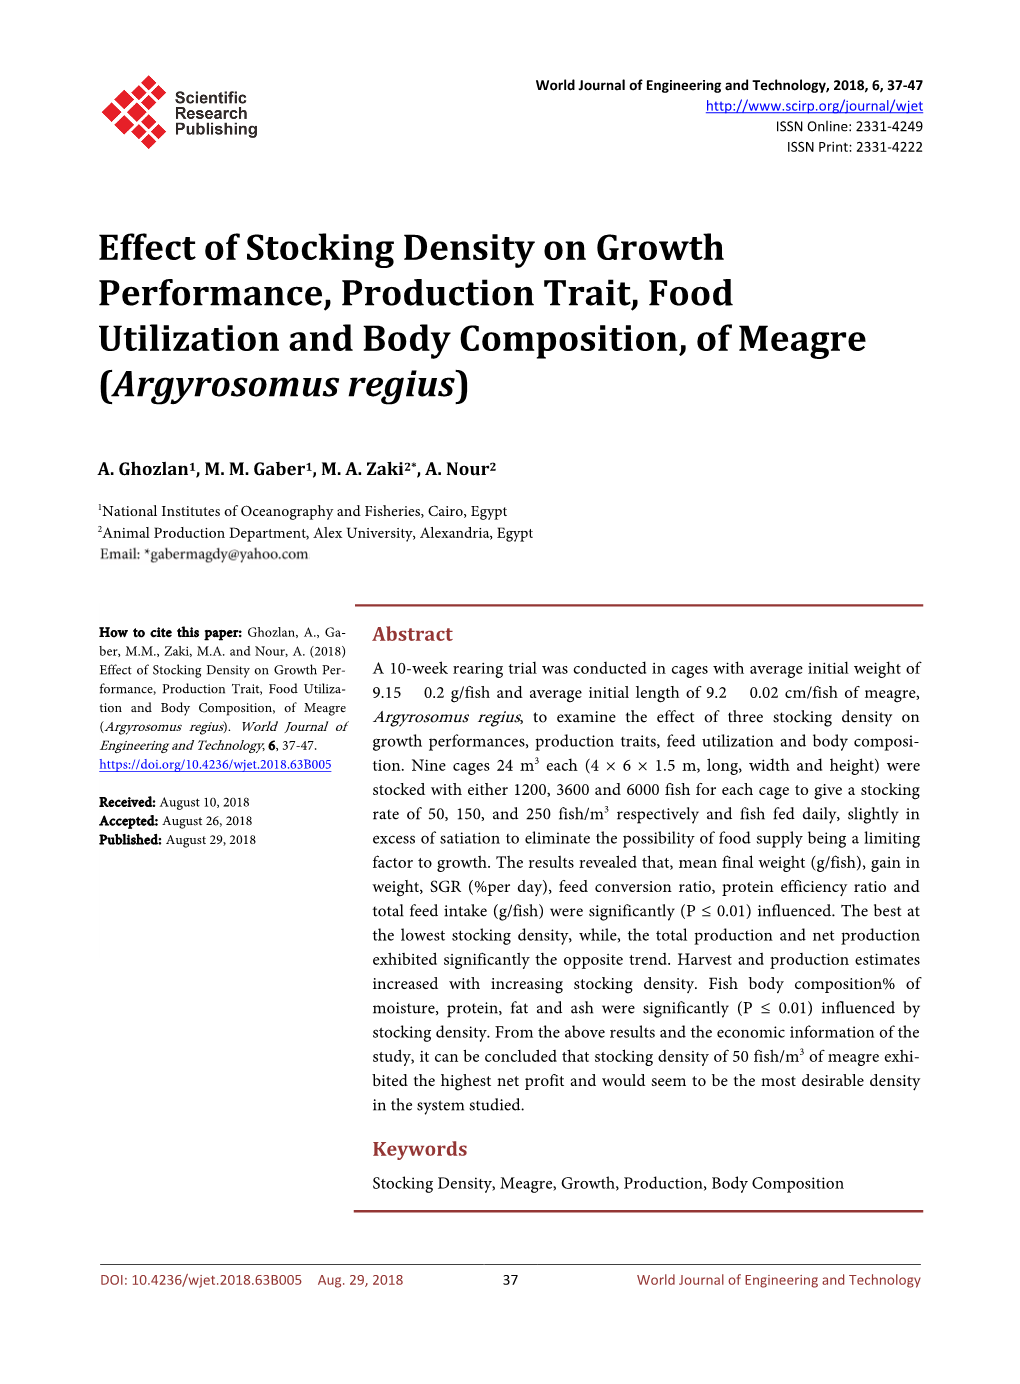 Effect of Stocking Density on Growth Performance, Production Trait, Food Utilization and Body Composition, of Meagre (Argyrosomus Regius)